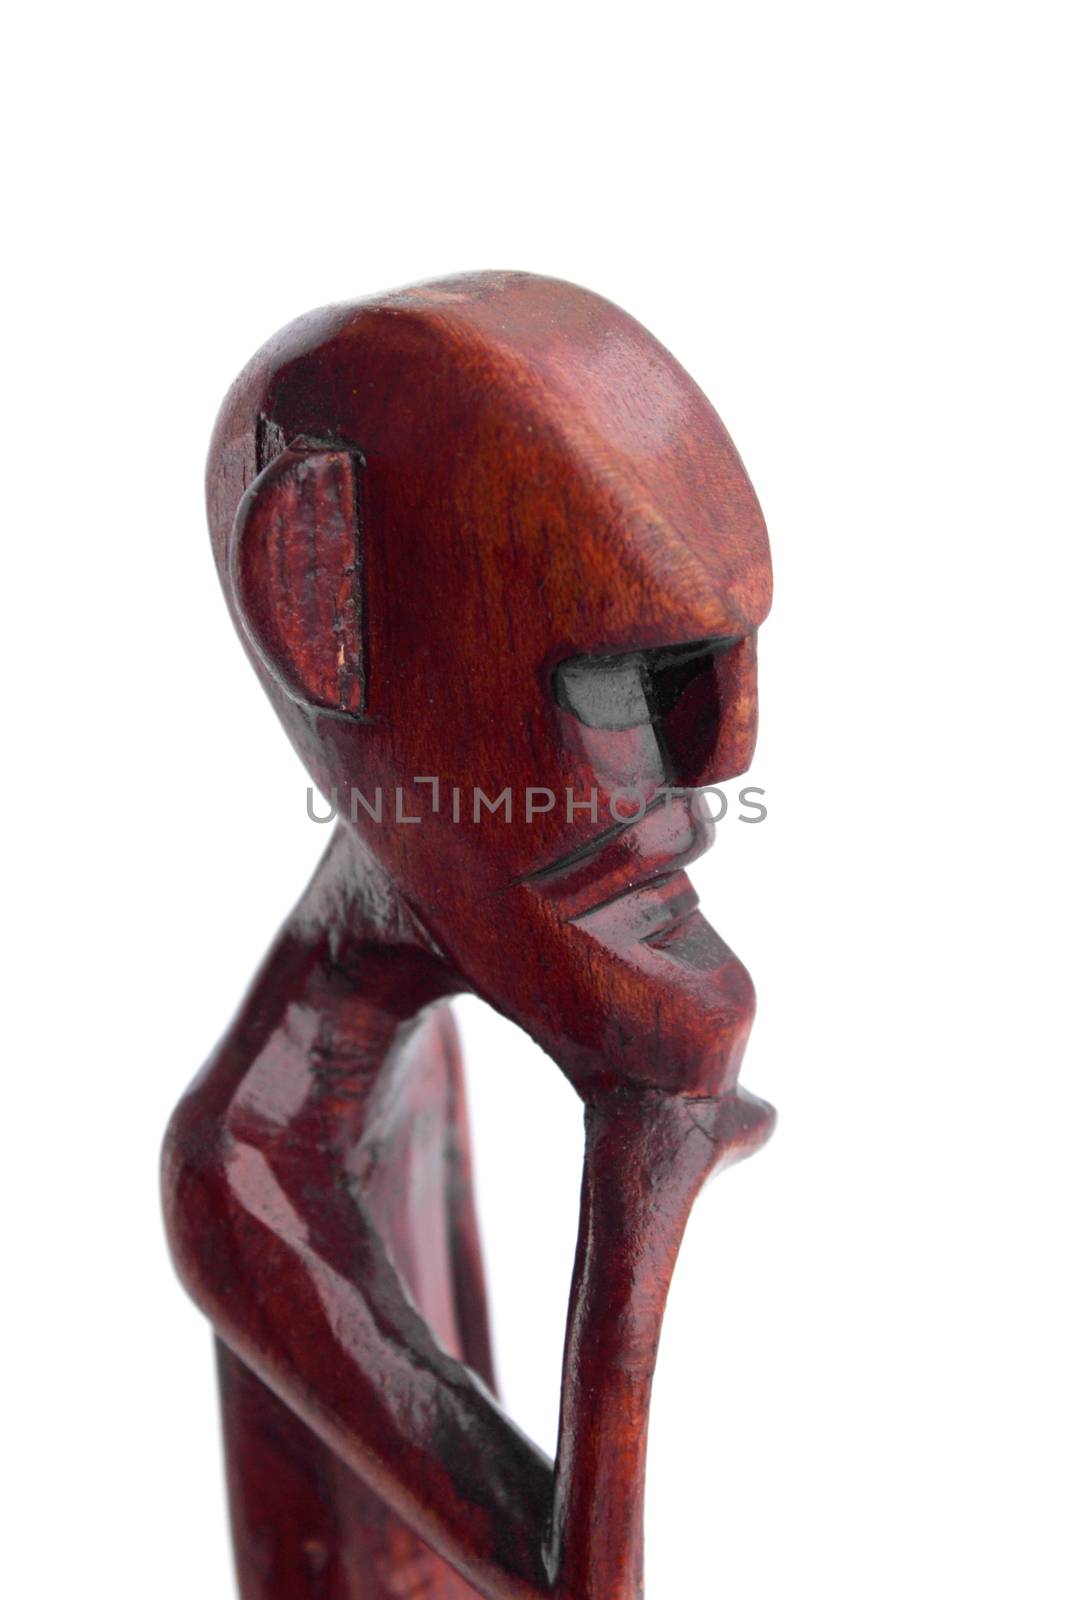 The African statuette of the thinking old man against the white background